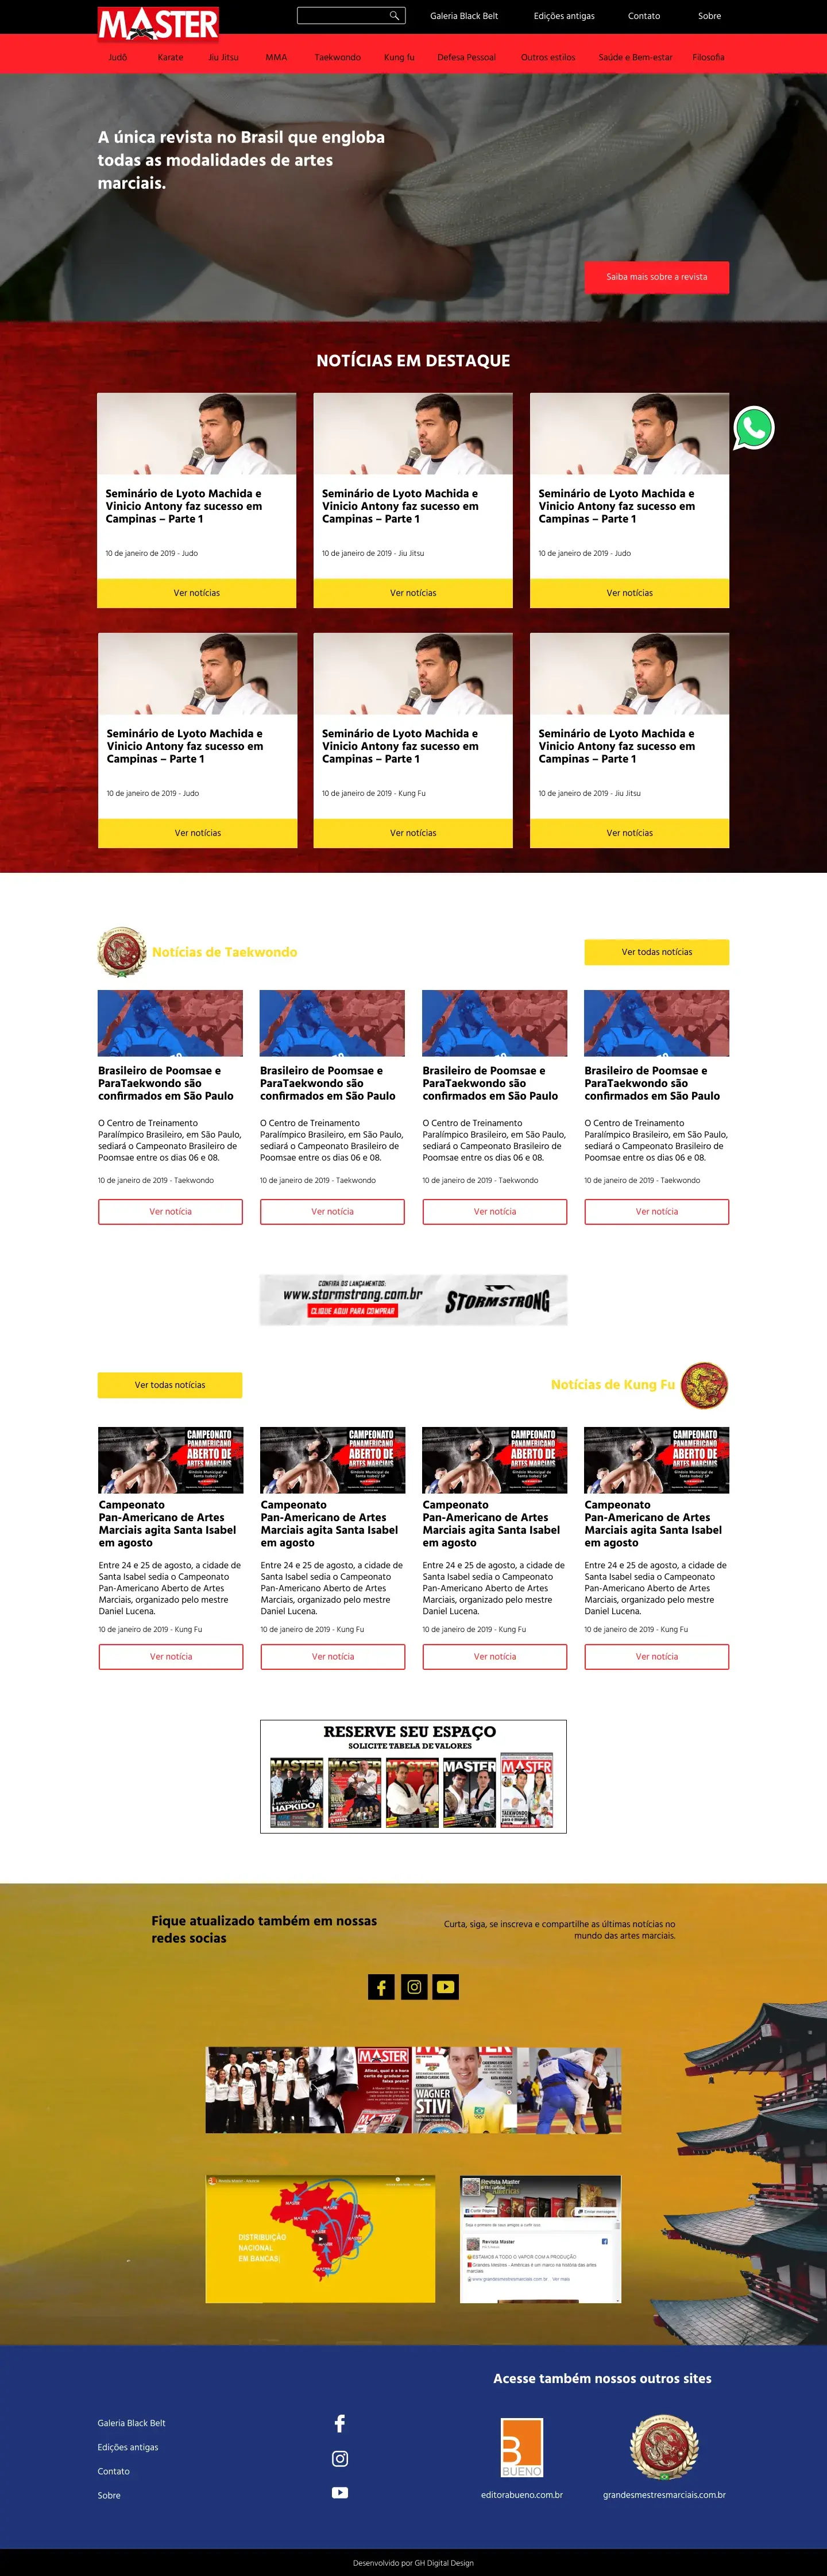 Image of the layout of the home page, on the Master Magazine website.